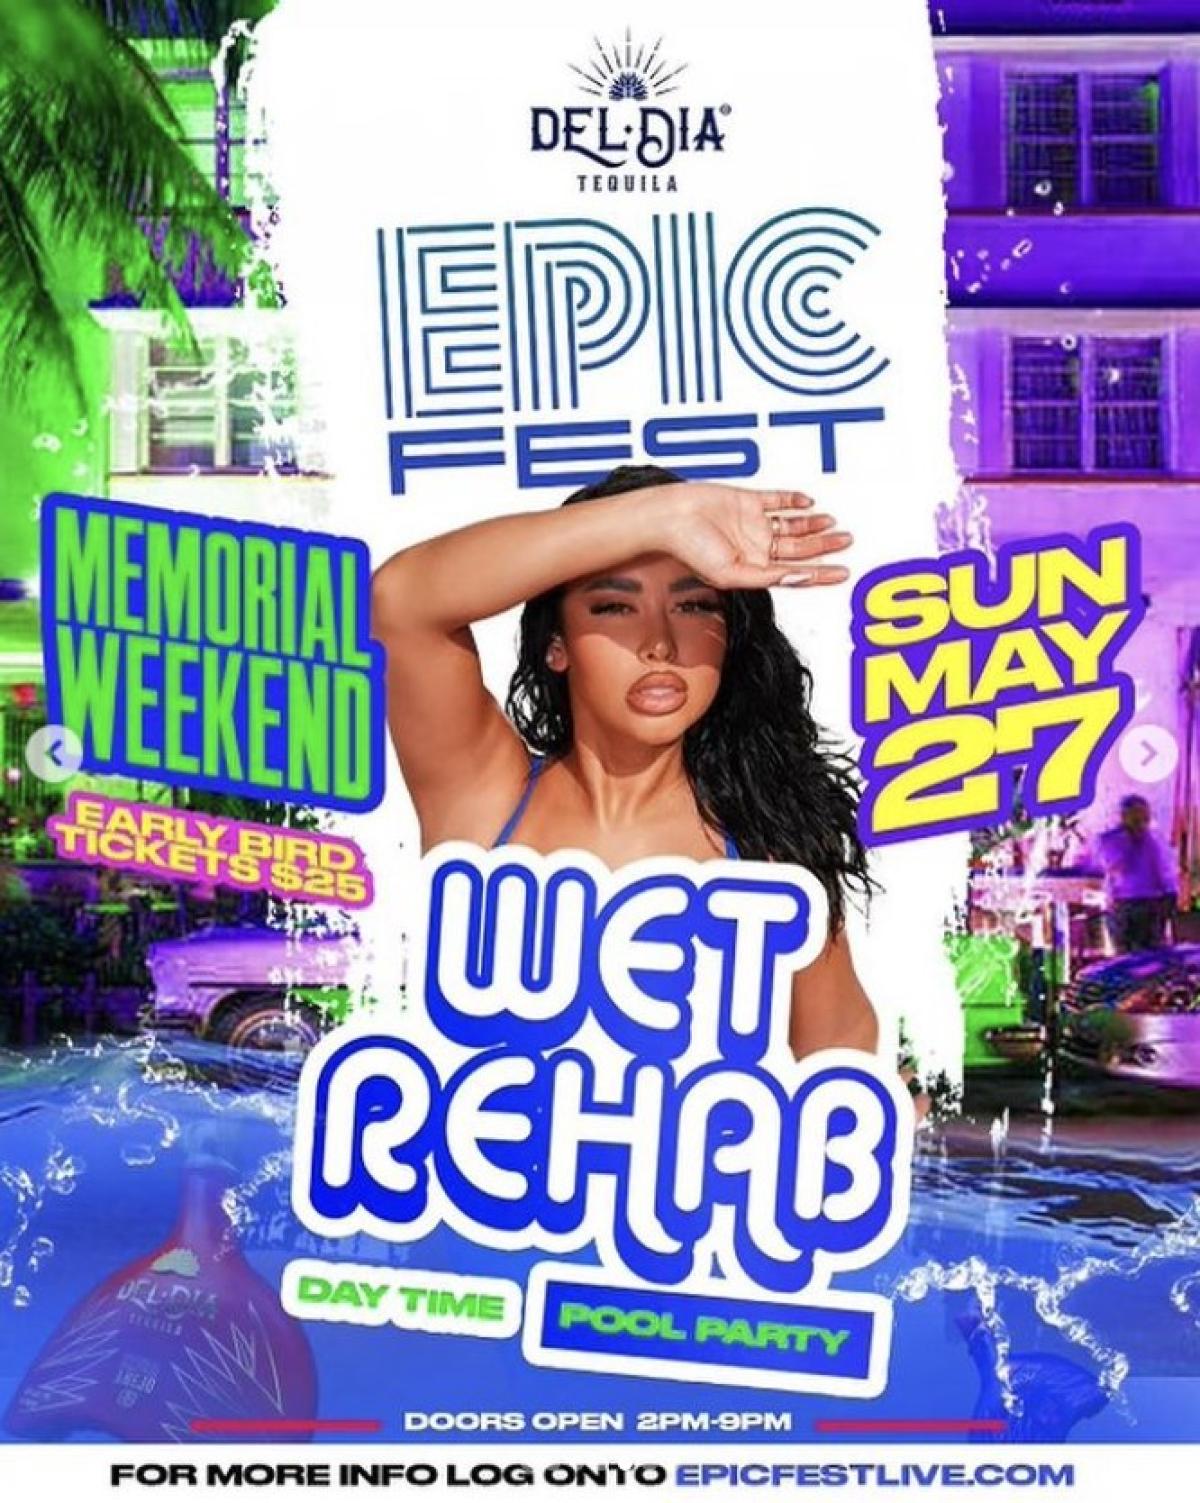 Epic Fest: Wet Rehab Pool Party  flyer or graphic.